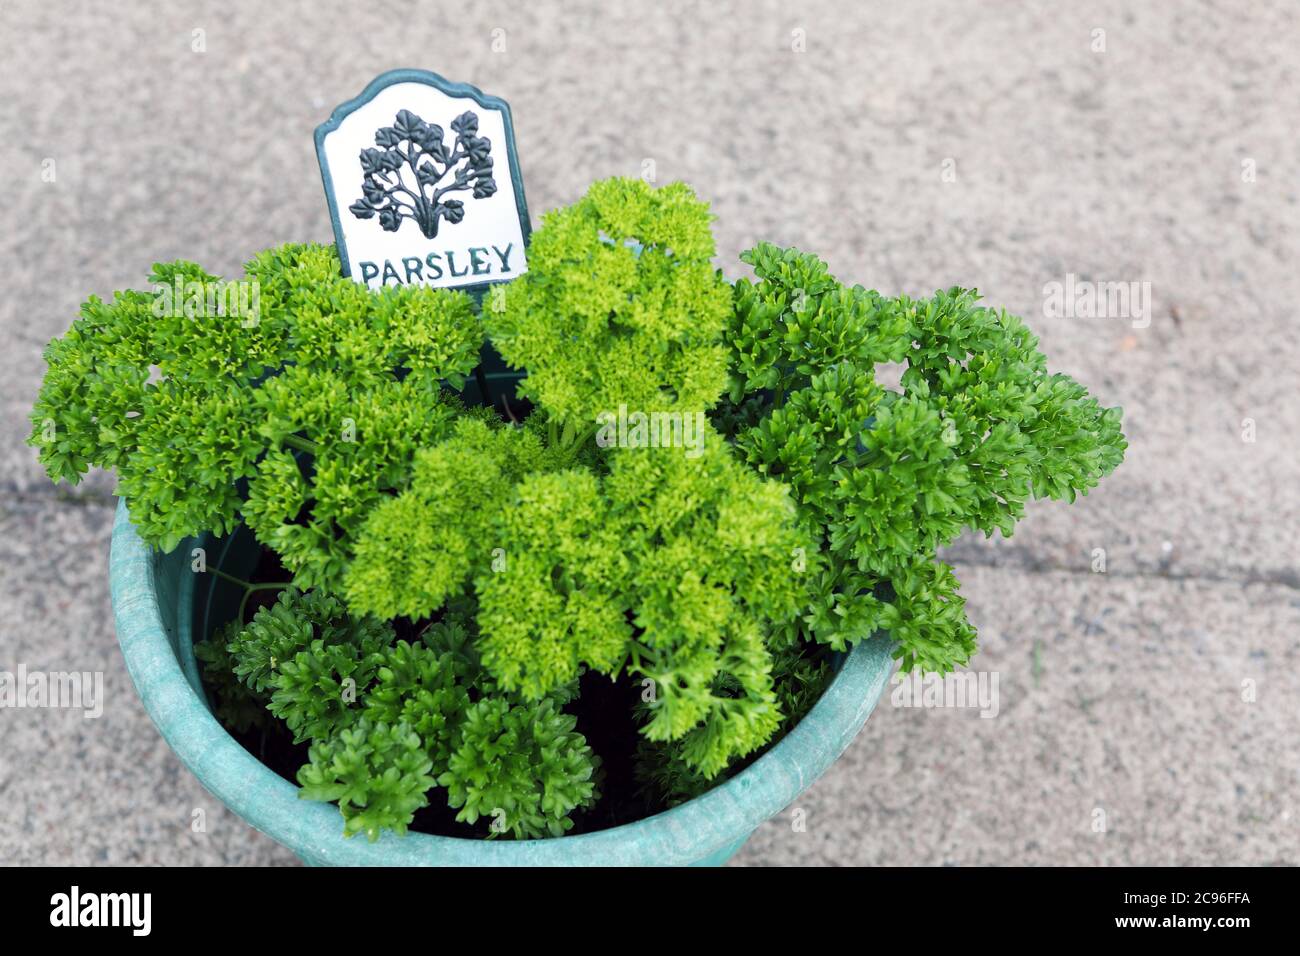 Parsley grown from seed Stock Photo